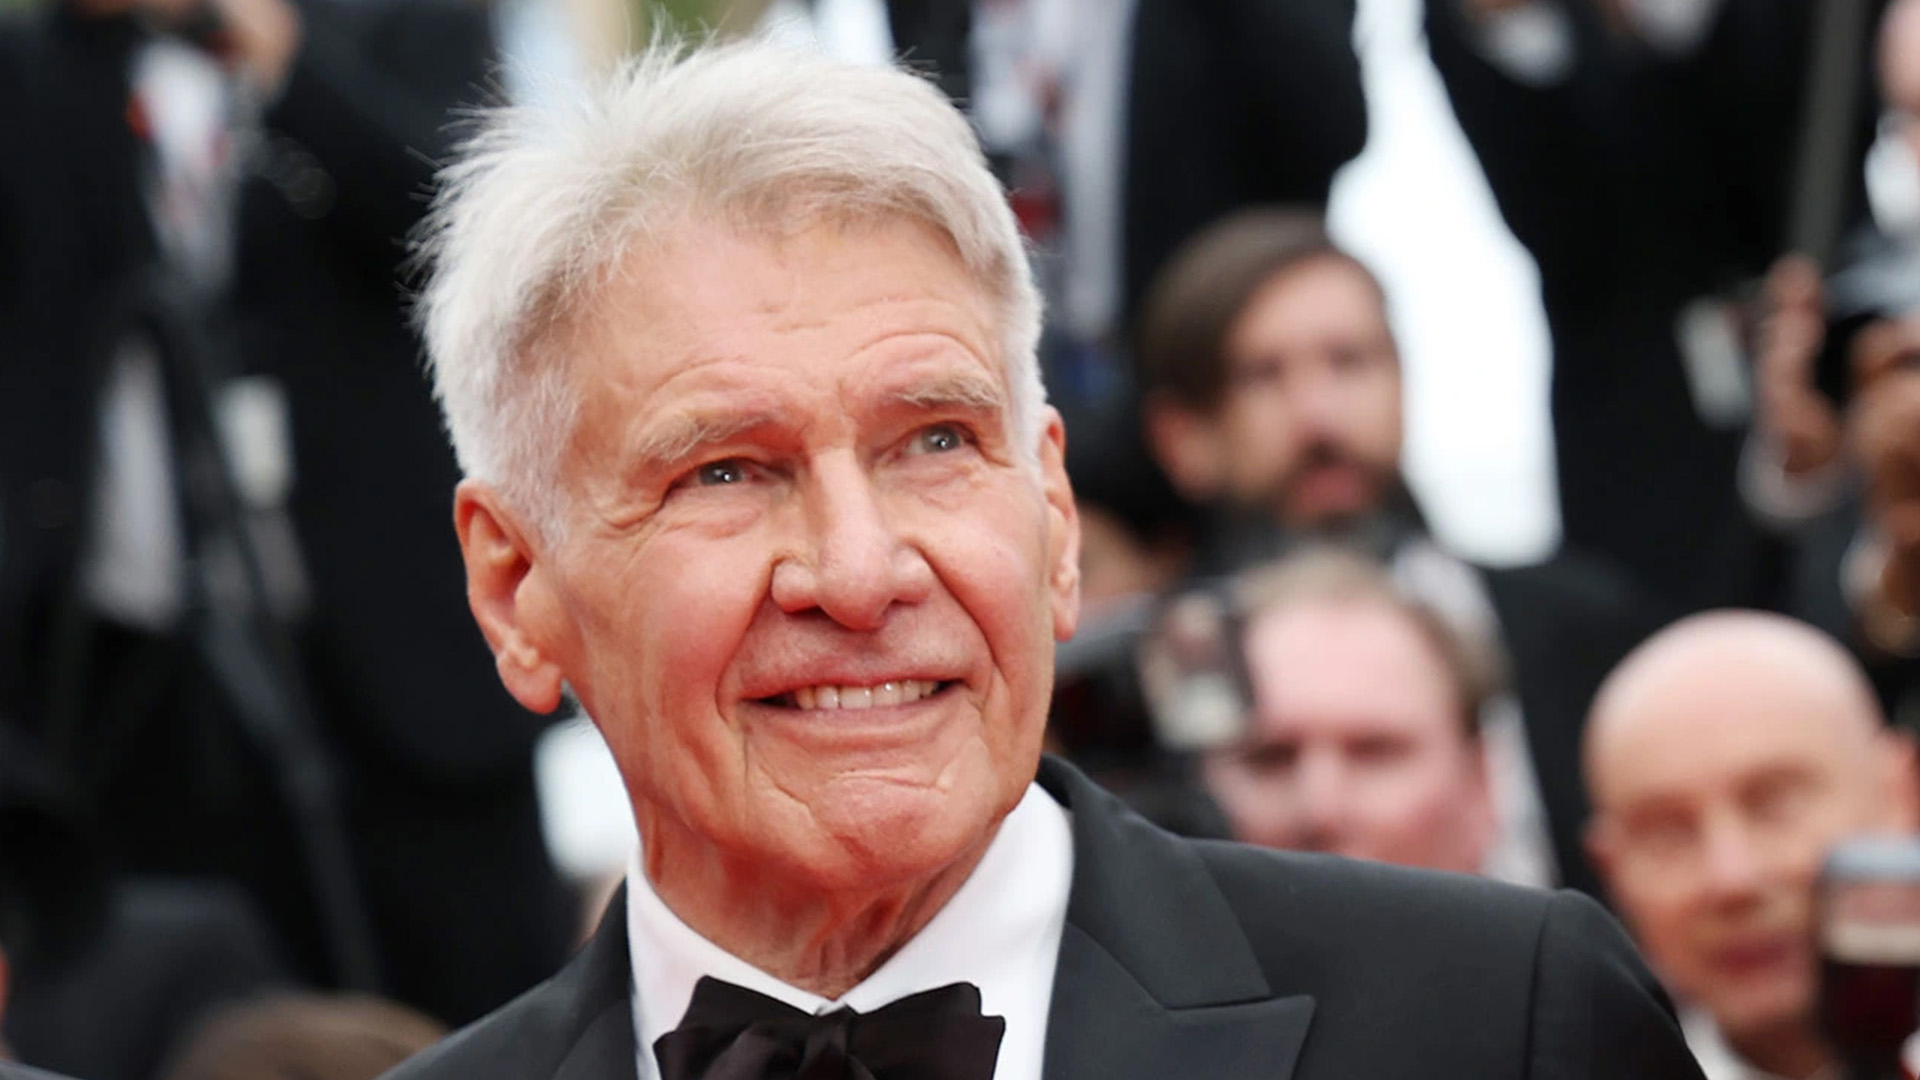 Harrison Ford Honored at Cannes Film Festival With Honorary Palme d’Or for Lifetime Achievement | THR News